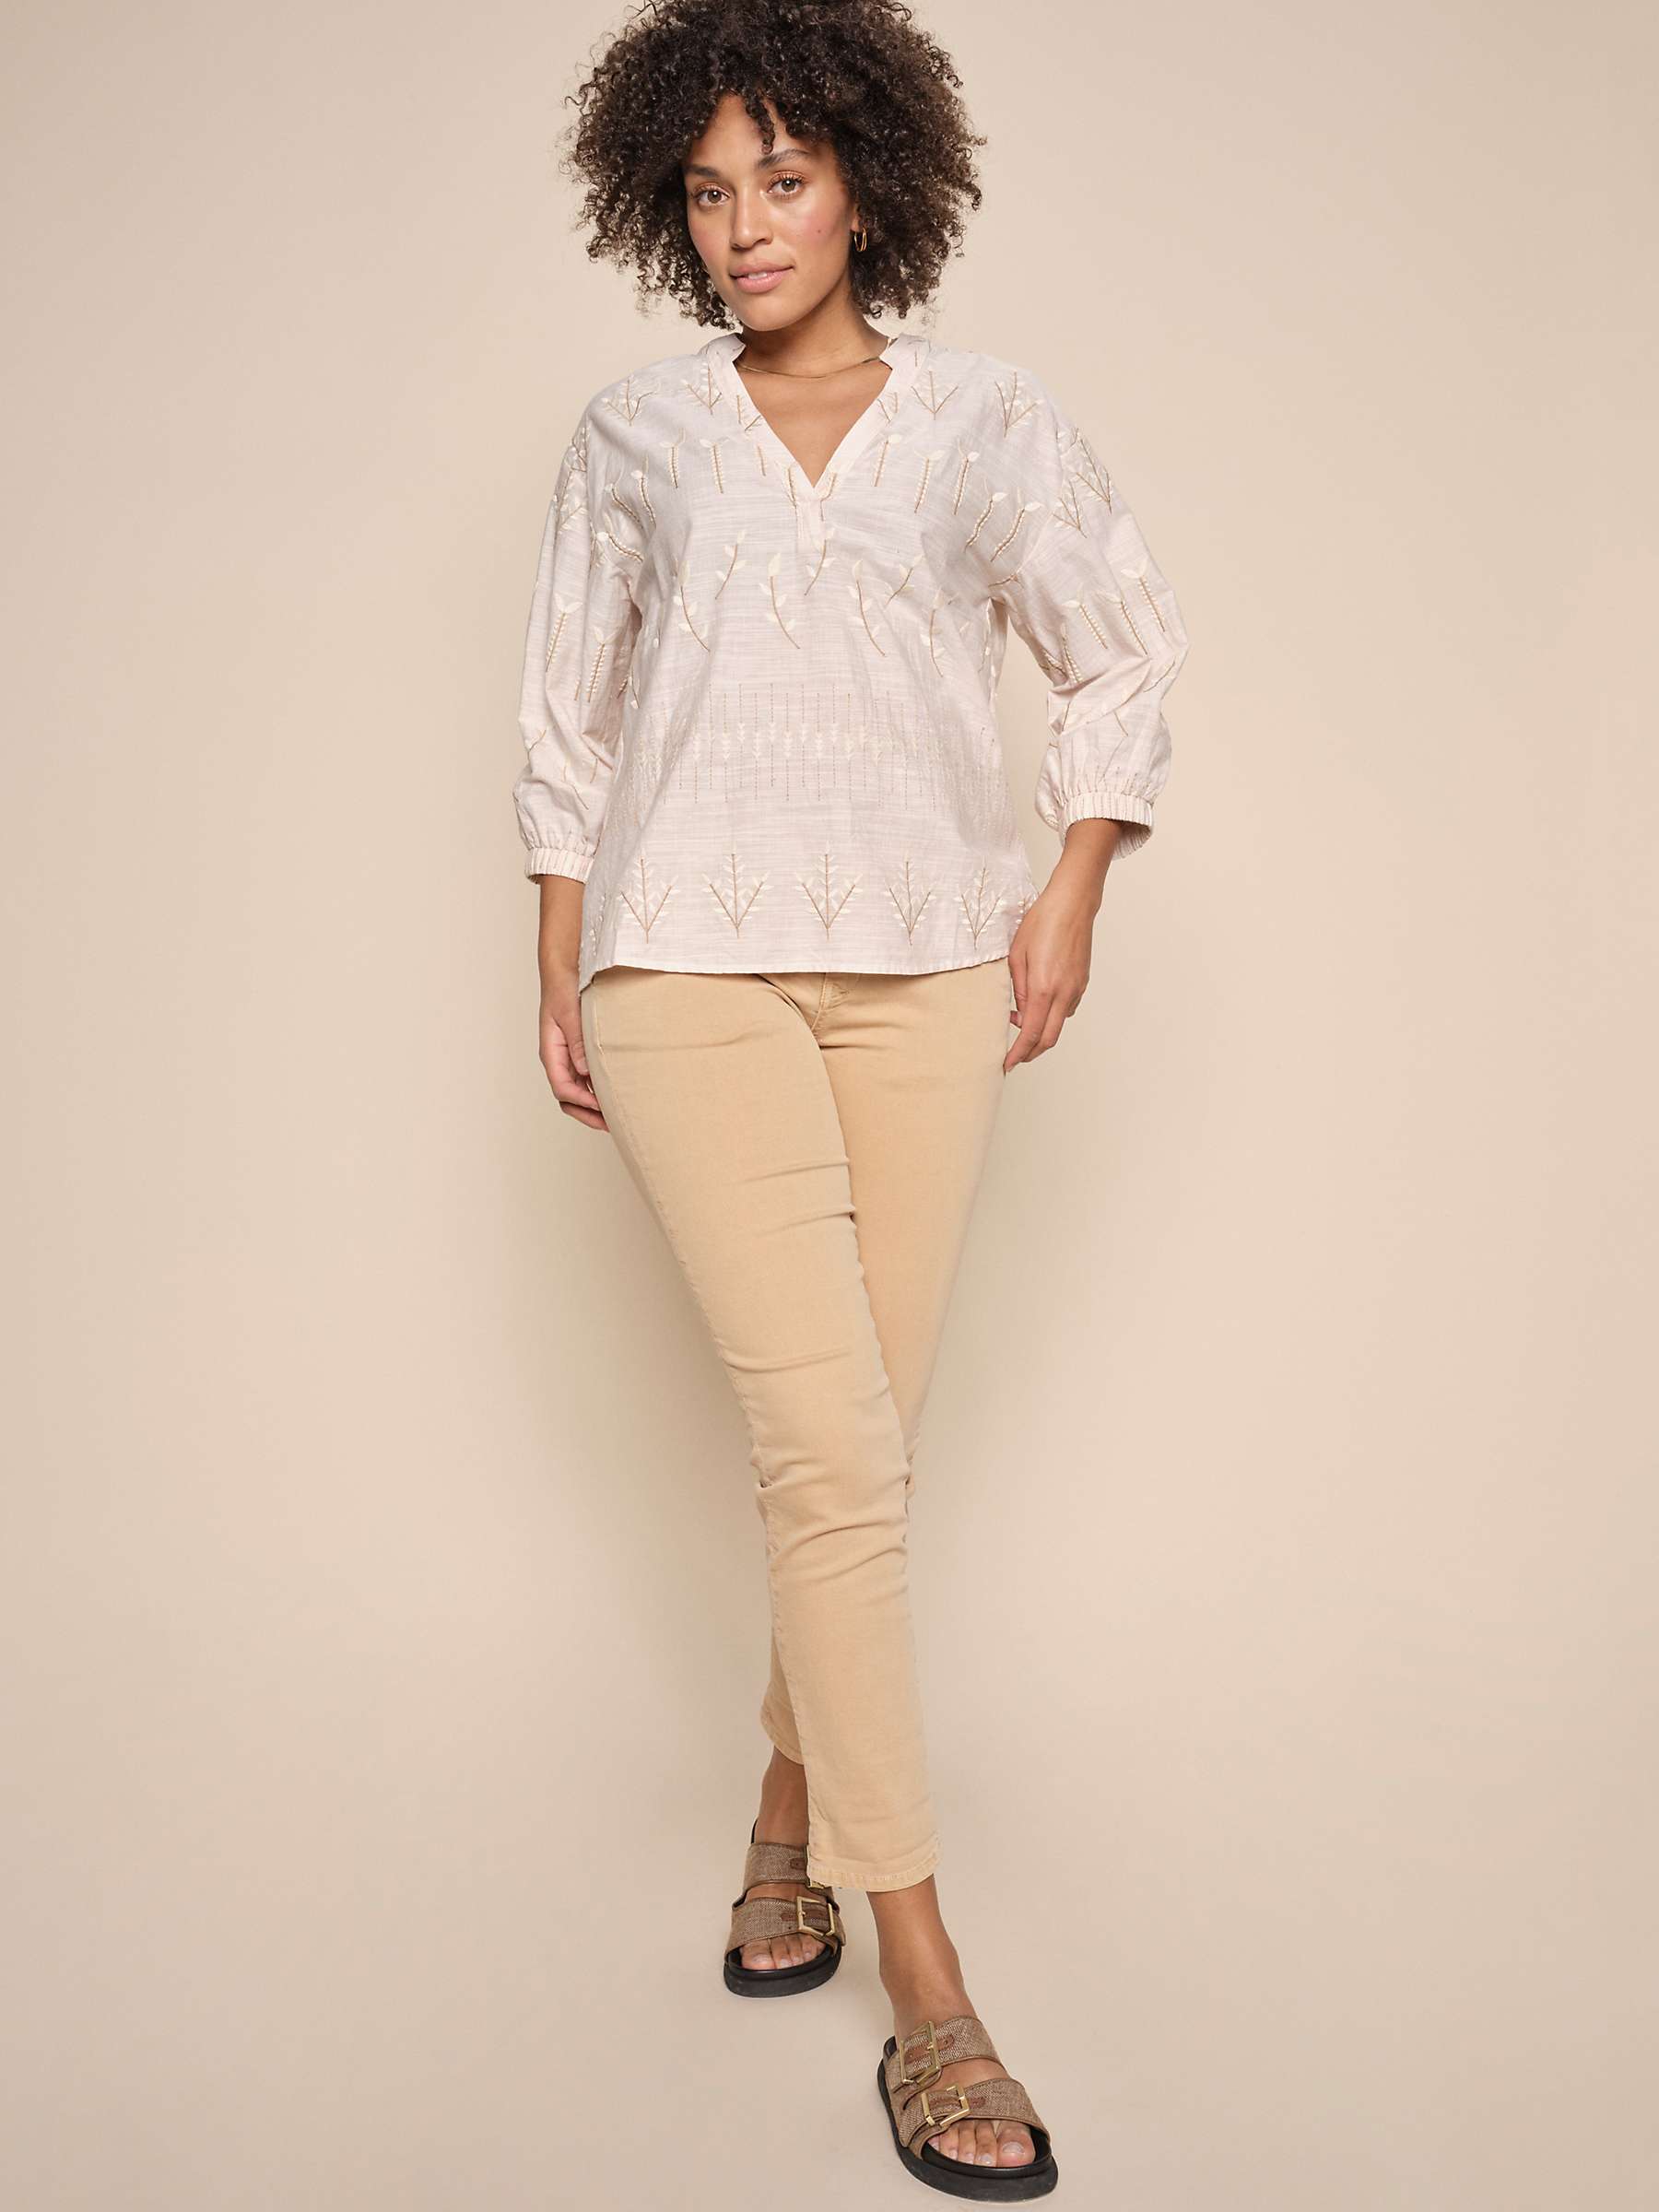 Buy MOS MOSH Nadine Embroidered Blouse, Tan Online at johnlewis.com